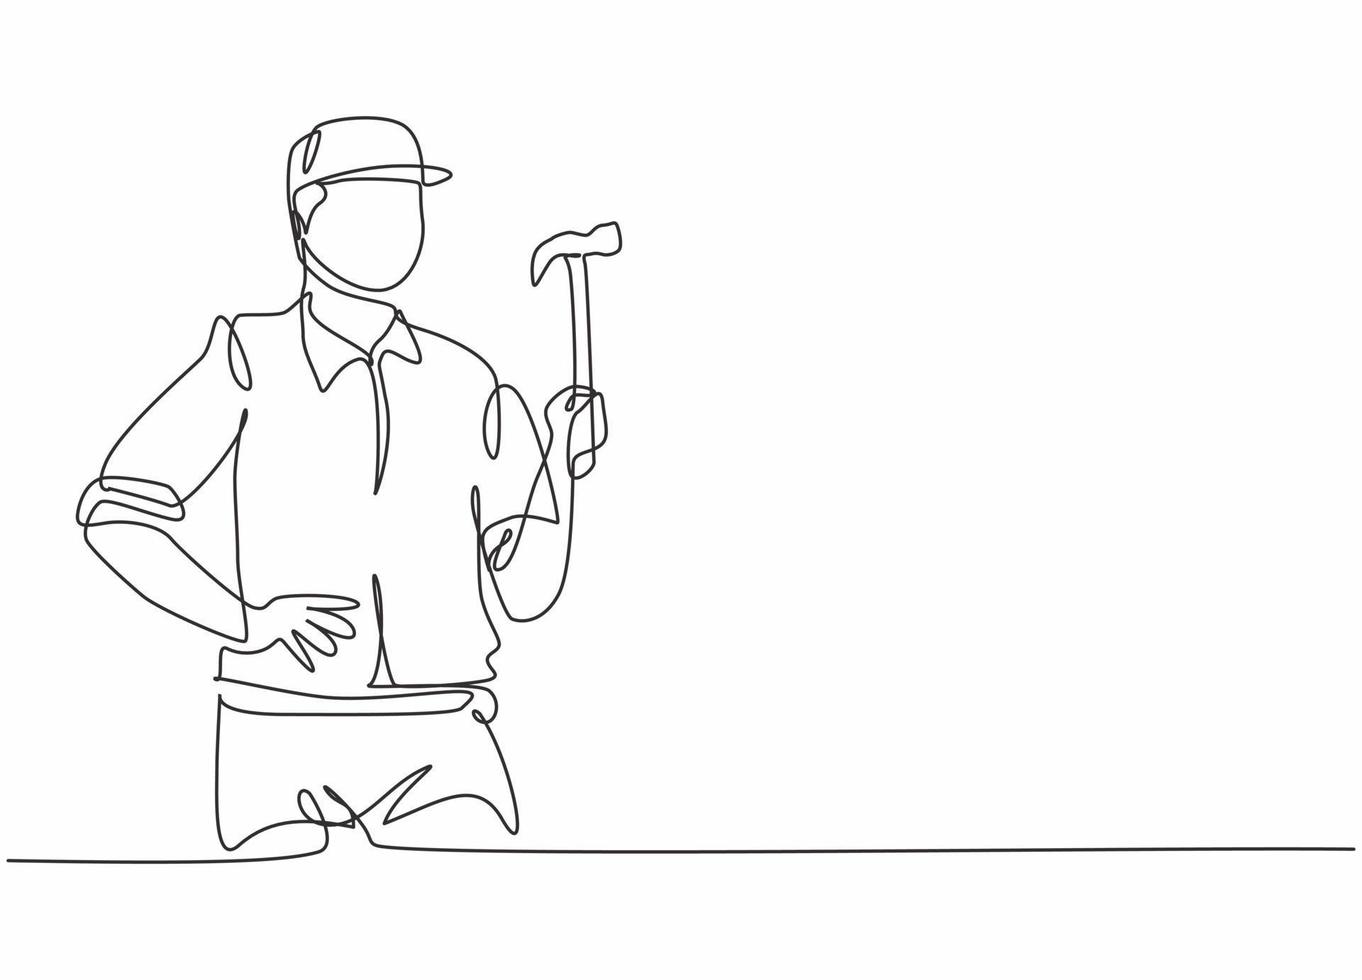 Single one line drawing of young handyman holding hammer ready to work. Professional job profession and occupation minimal concept. Continuous line draw design graphic vector illustration